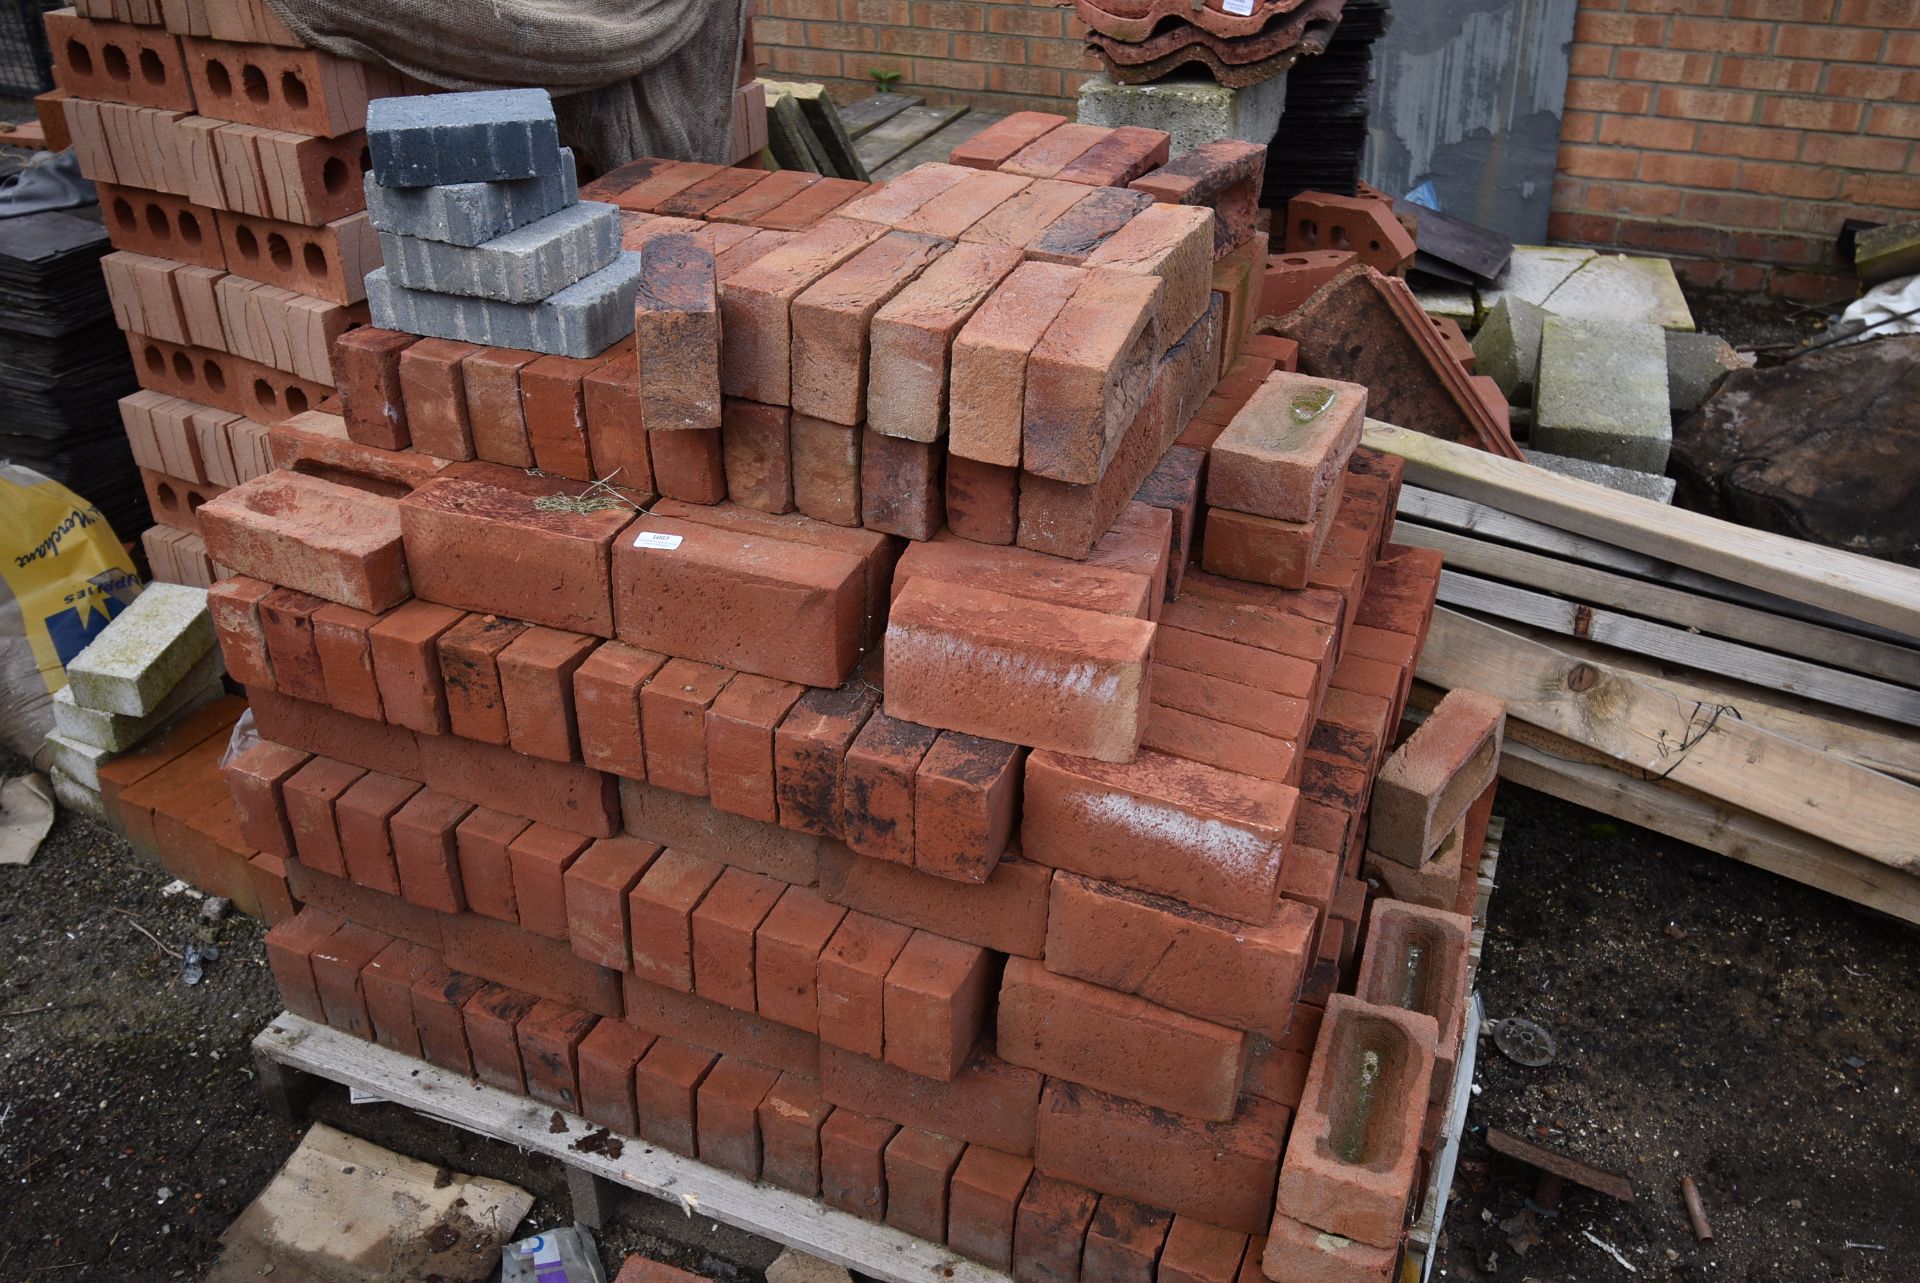 *Part Packs of Faced Building Bricks (Location: 64 King Edward St, Grimsby, DN31 3JP, Viewing